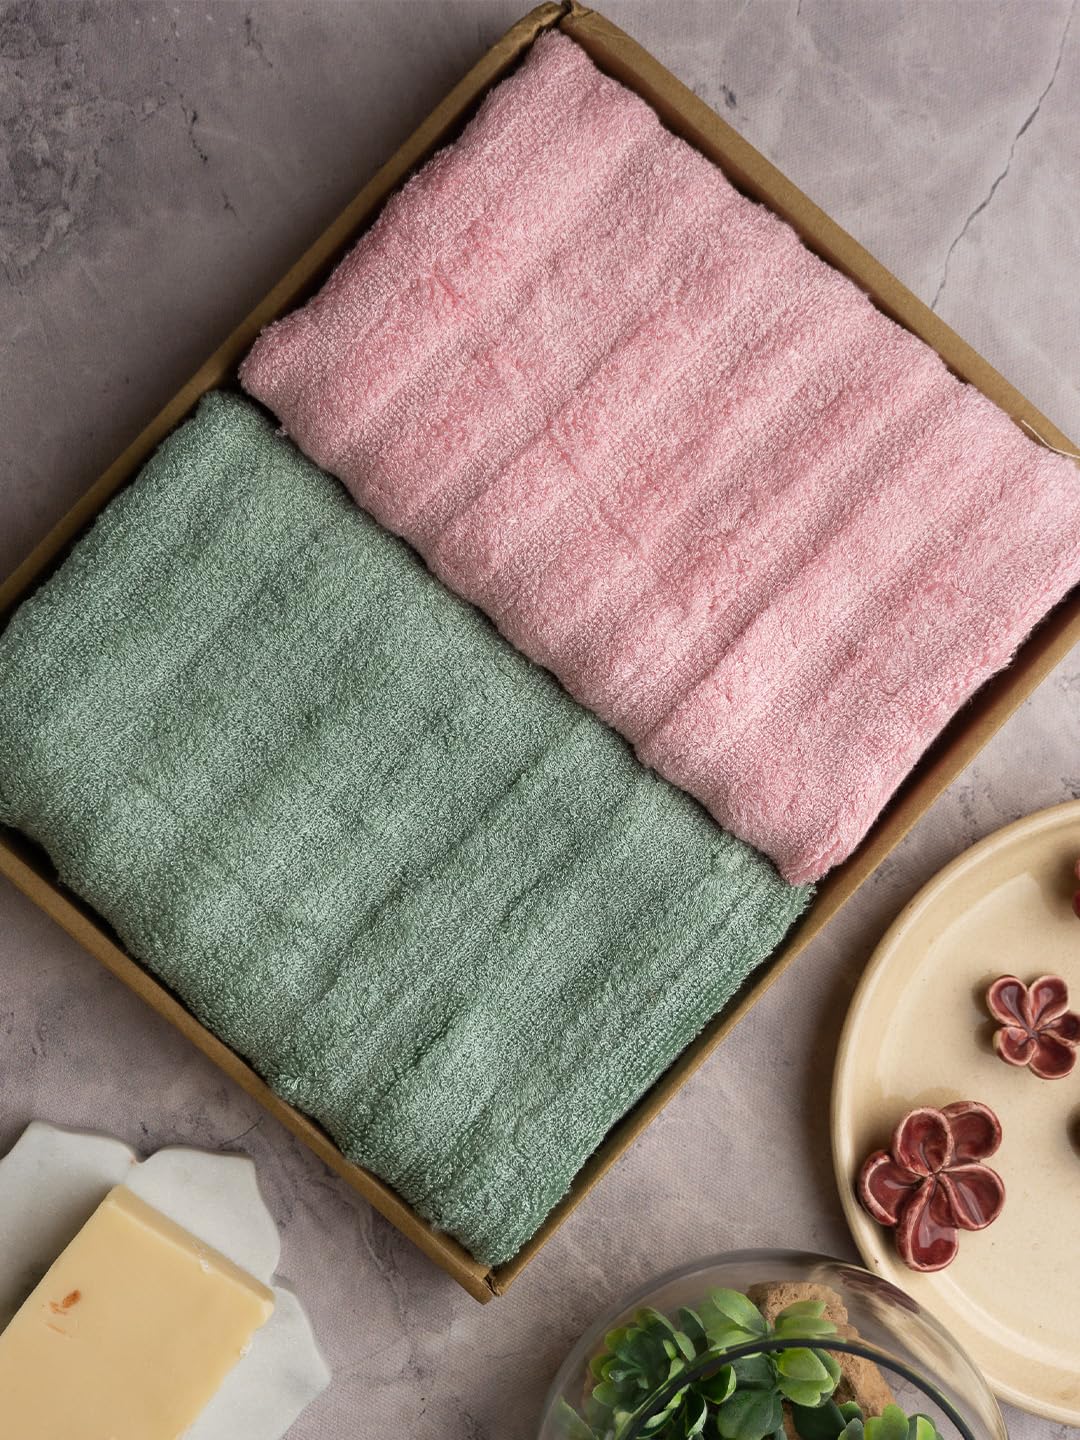 Mush Bamboo Hand Towels Set of 6 | Ultra Soft, Absorbent & Quick Dry Towel for Daily use. Gym, Pool, Travel, Sports and Yoga Towel for Men and Women | 29.5 x 13 Inches / 75 X 35 cms | 600 GSM (Set of 6 Olive Pink)